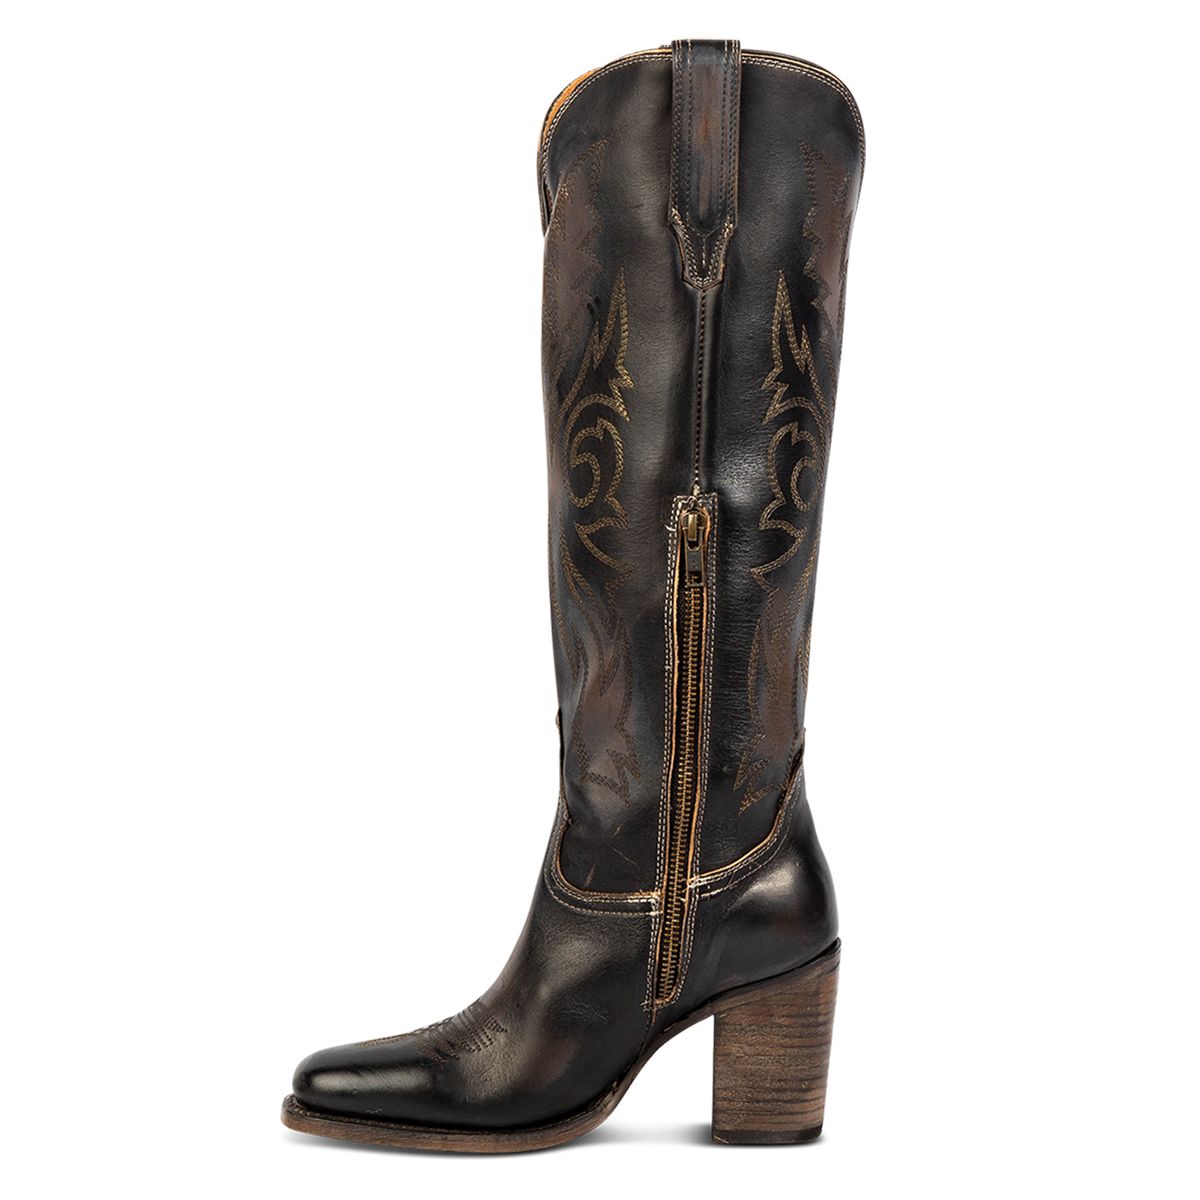 Inside view showing an inside working brass zipper, stacked heel and shaft stitch detailing on FREEBIRD women's Panama black leather boot